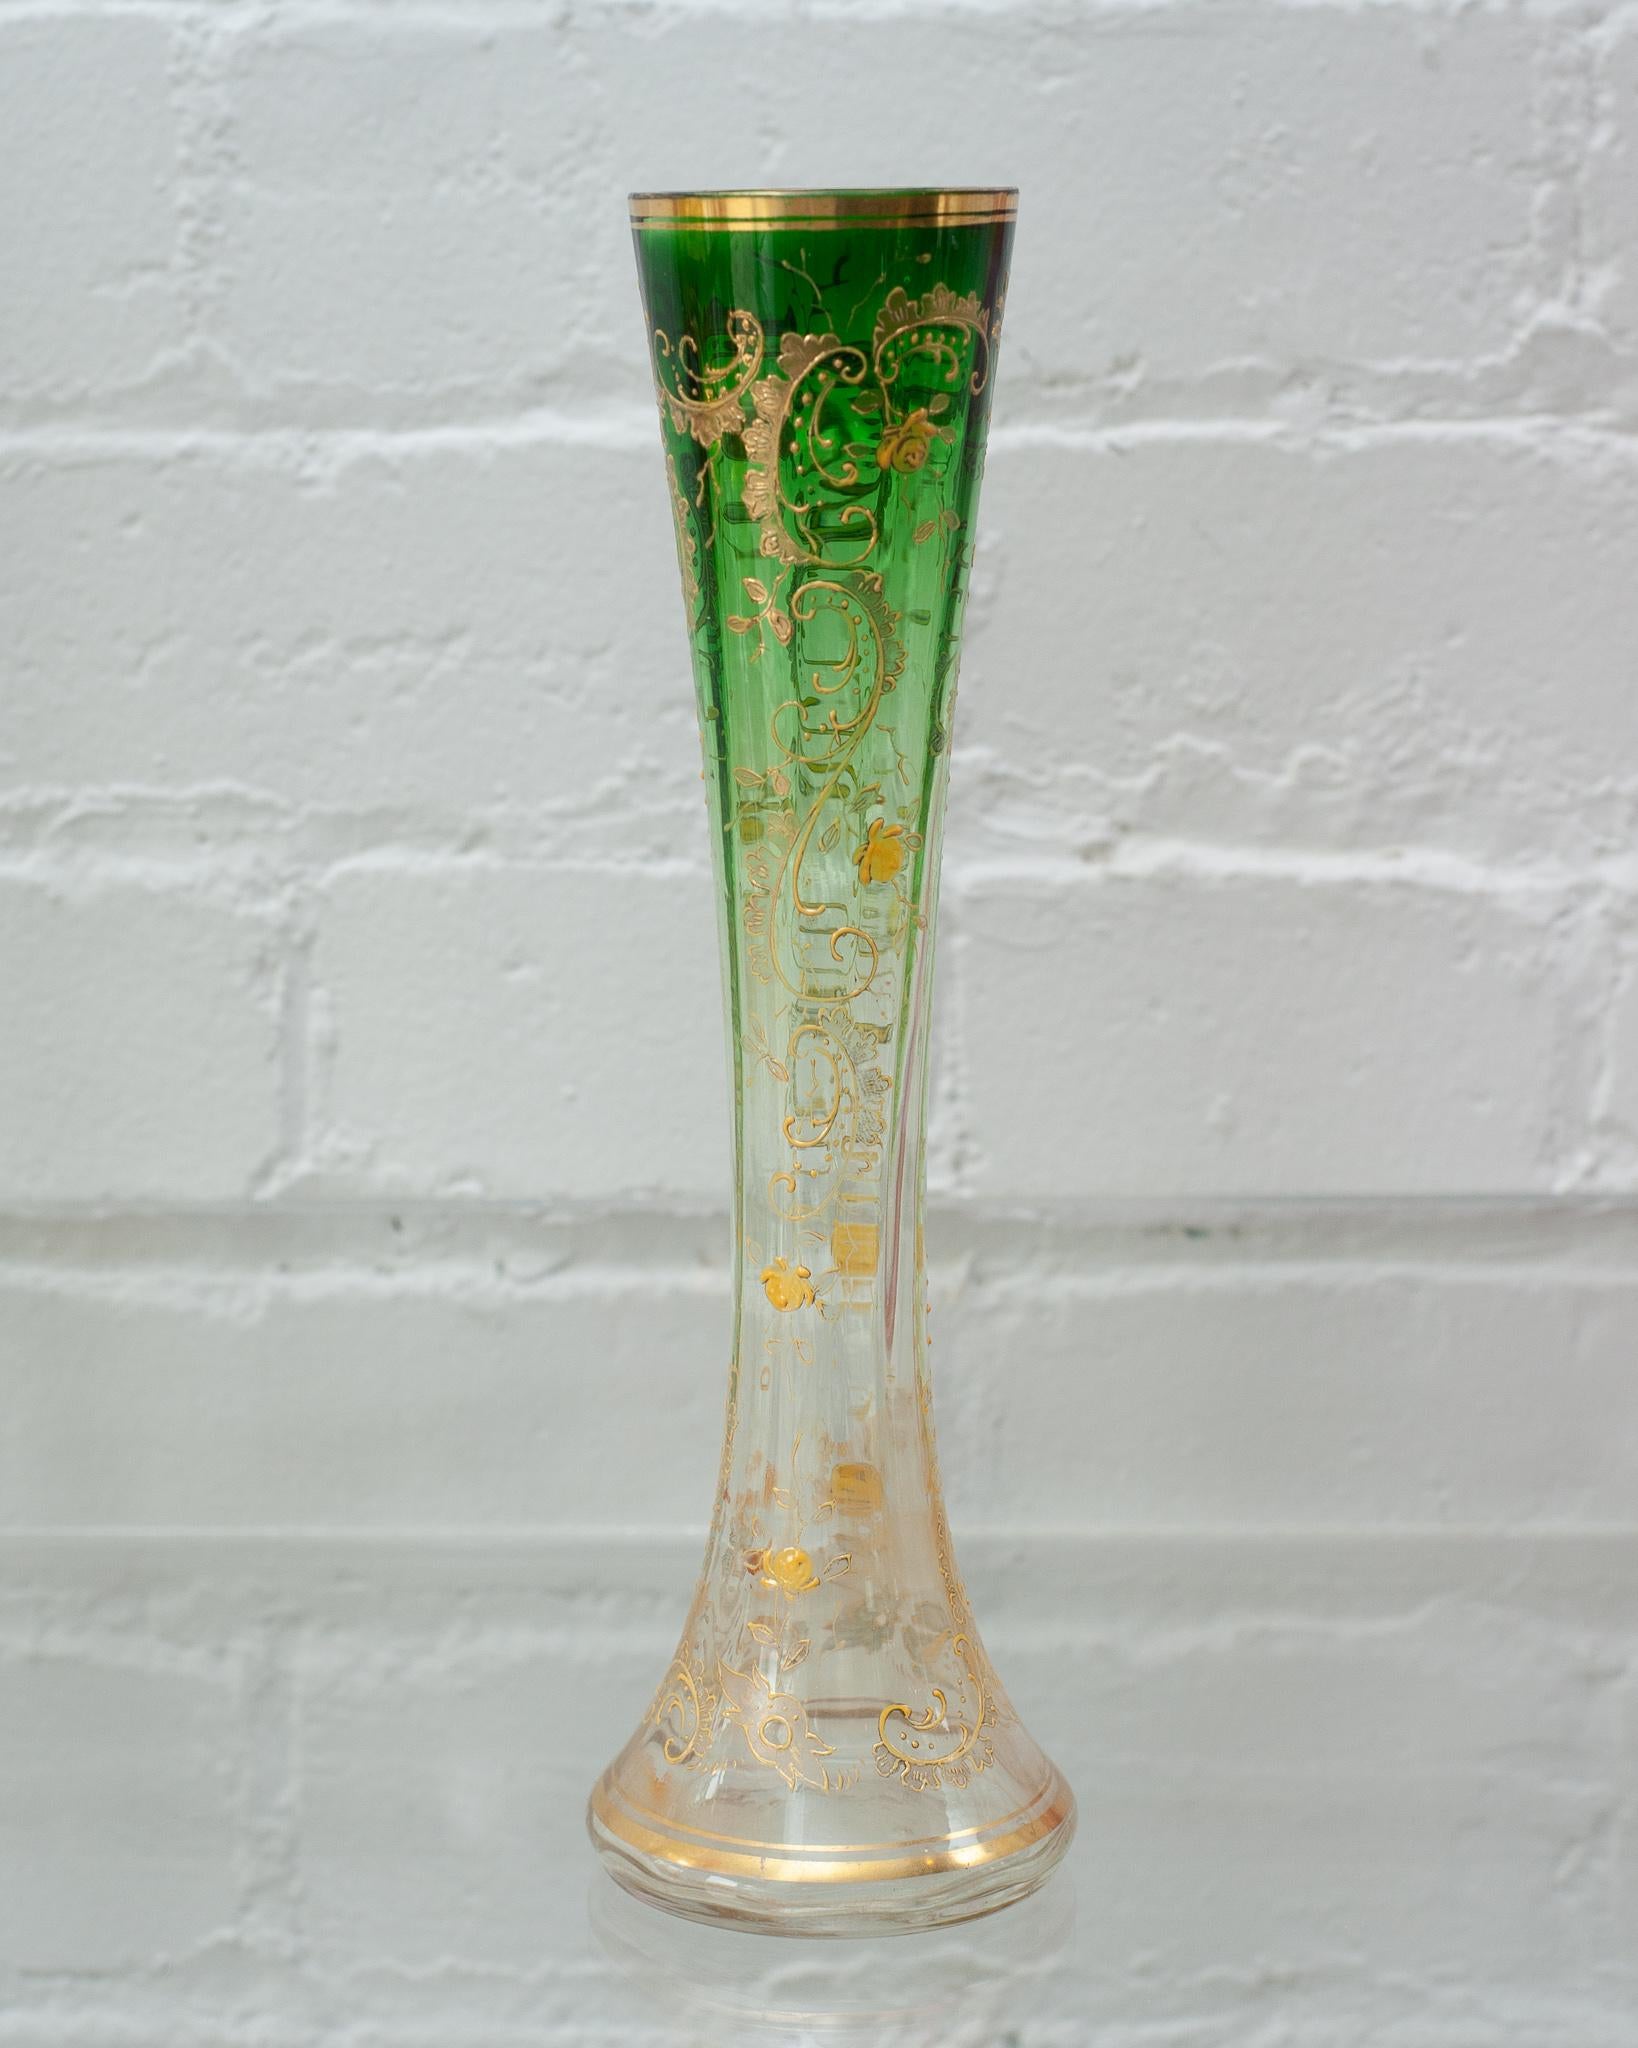 A beautiful antique Moser flared vase in emerald green to clear faded crystal, with gold gilded details. Beautifully made and in excellent condition for its age. A beautiful example of turn of the century Bohemian craftsmanship.